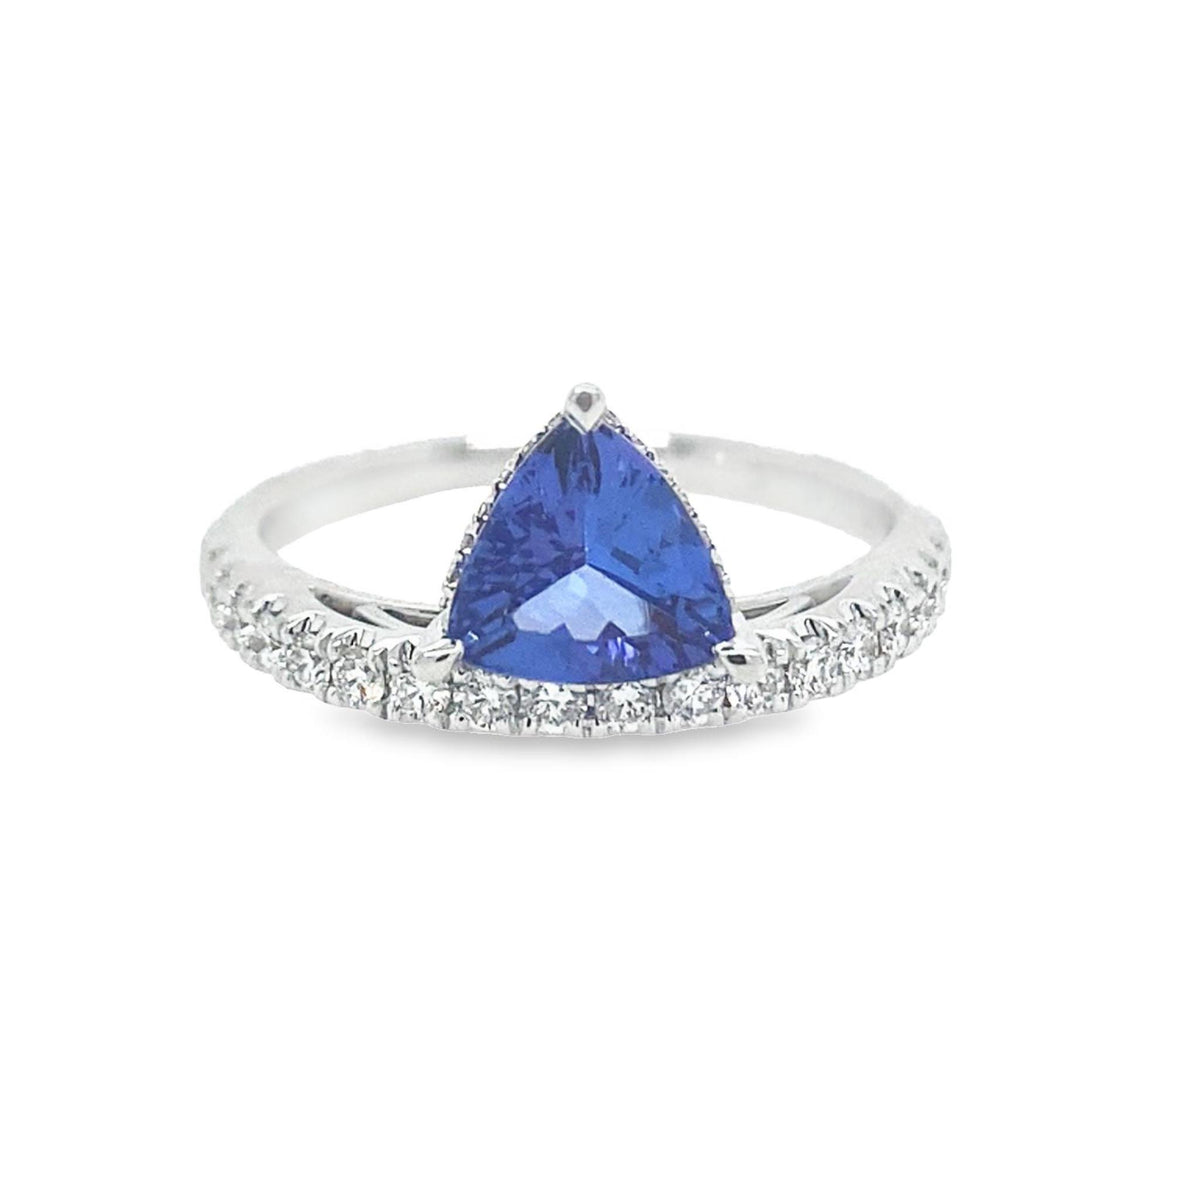 18Kt White Gold Contemporary Gemstone Ring With 0.99ct Tanzanite